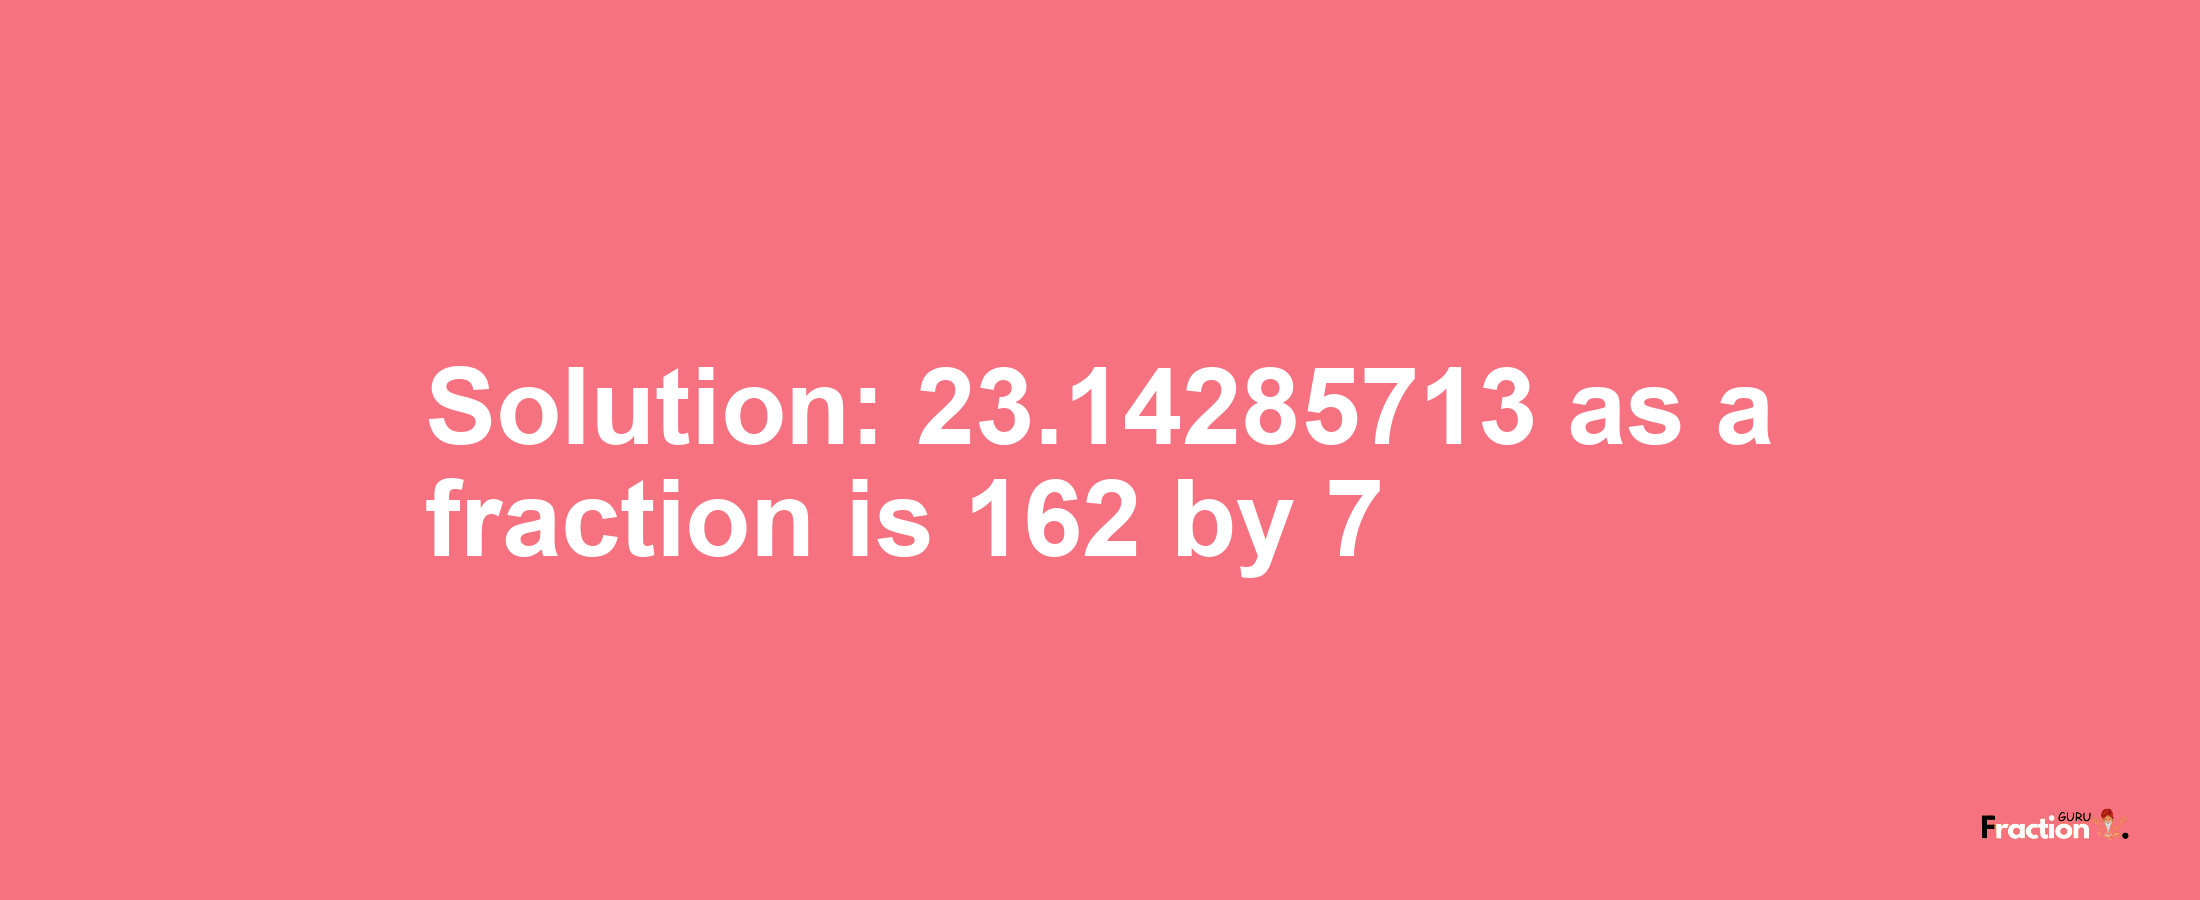 Solution:23.14285713 as a fraction is 162/7